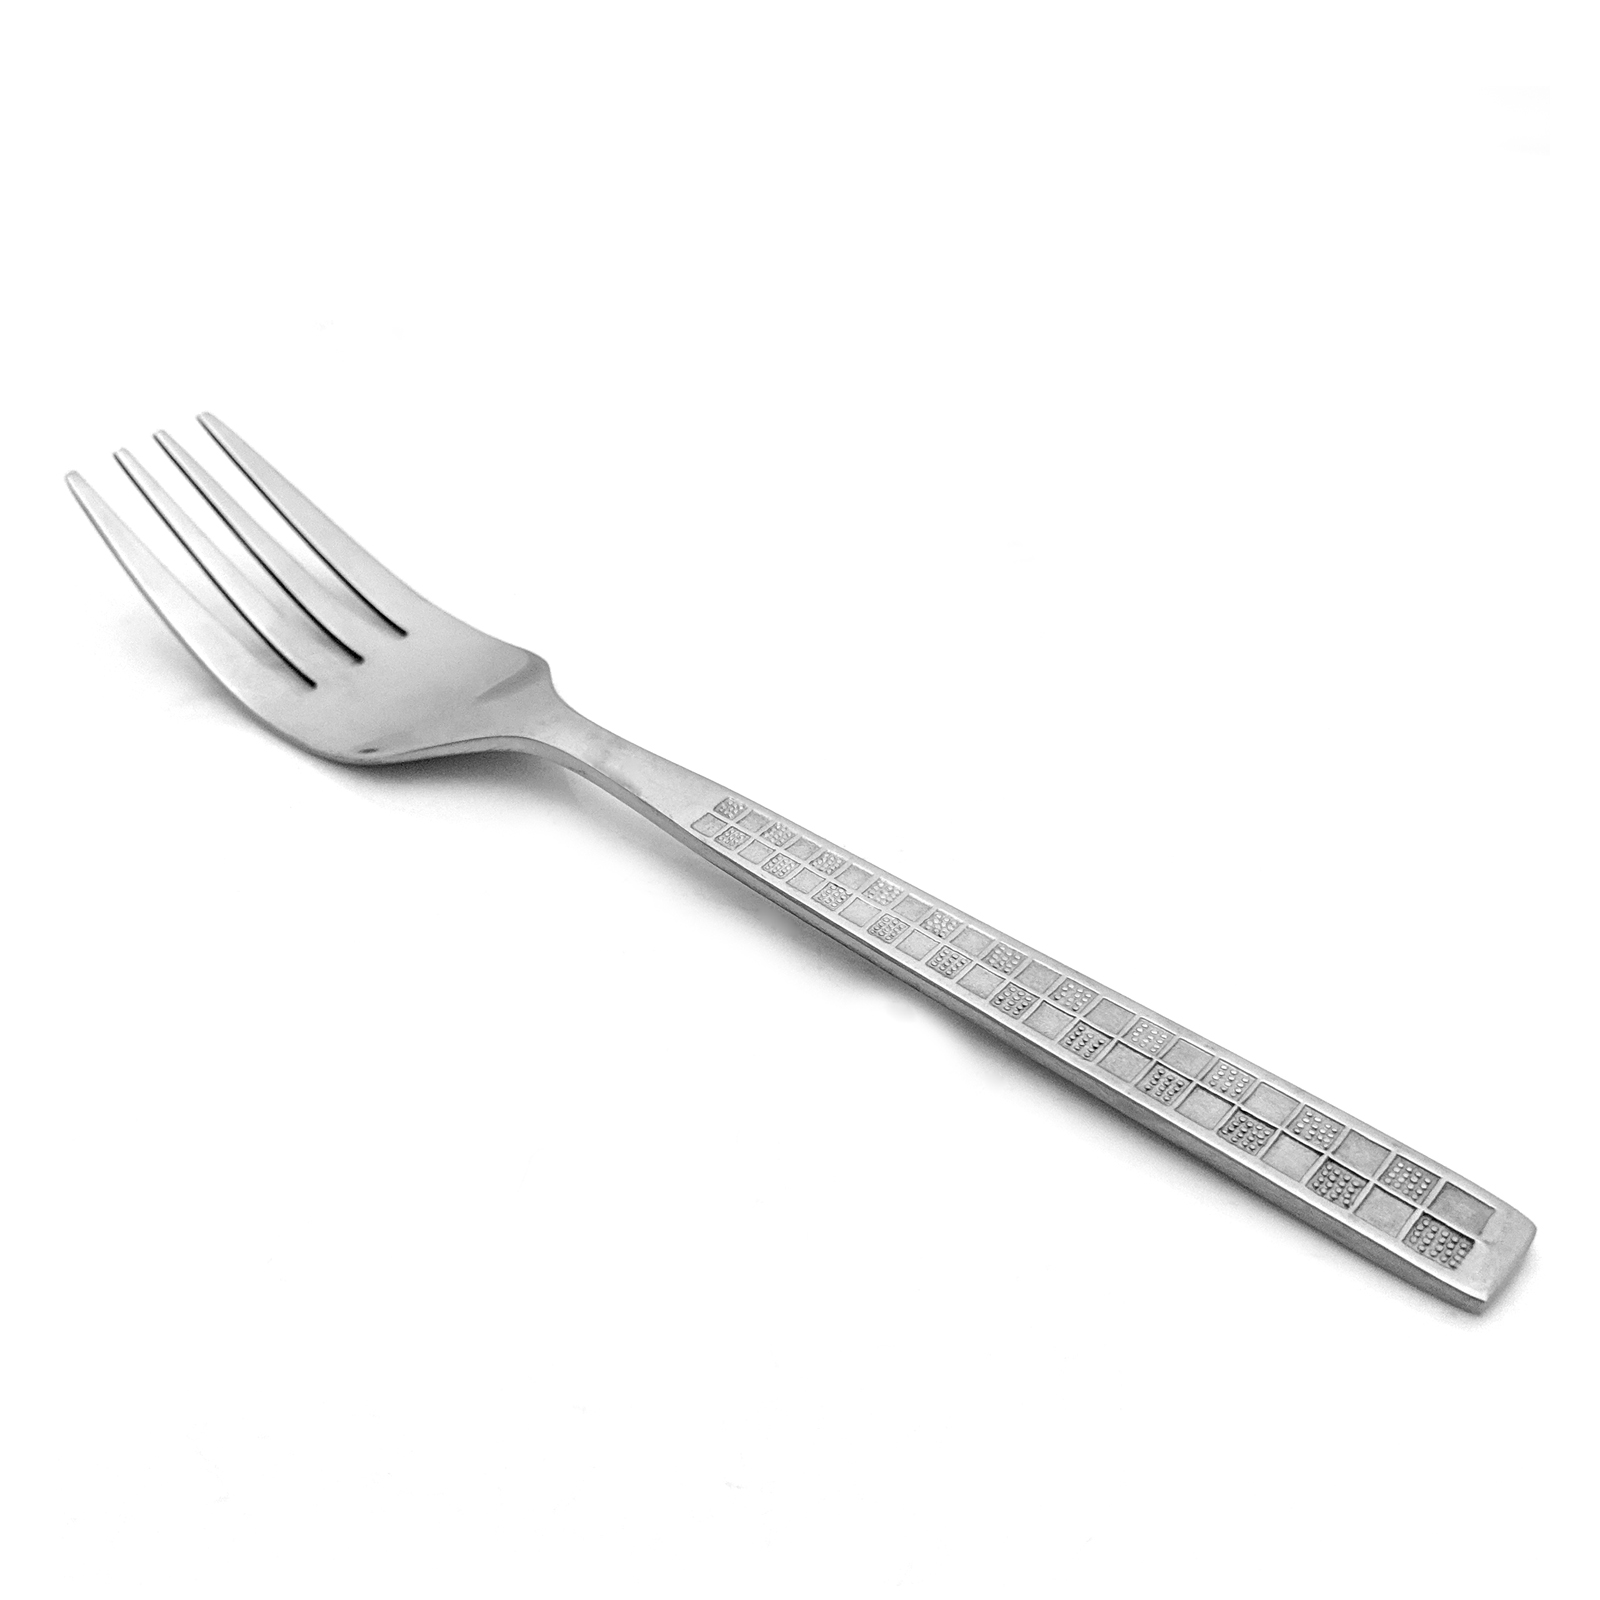 555 Checked Stainless Steel Dessert Fork 2-pc/12-pc Pack